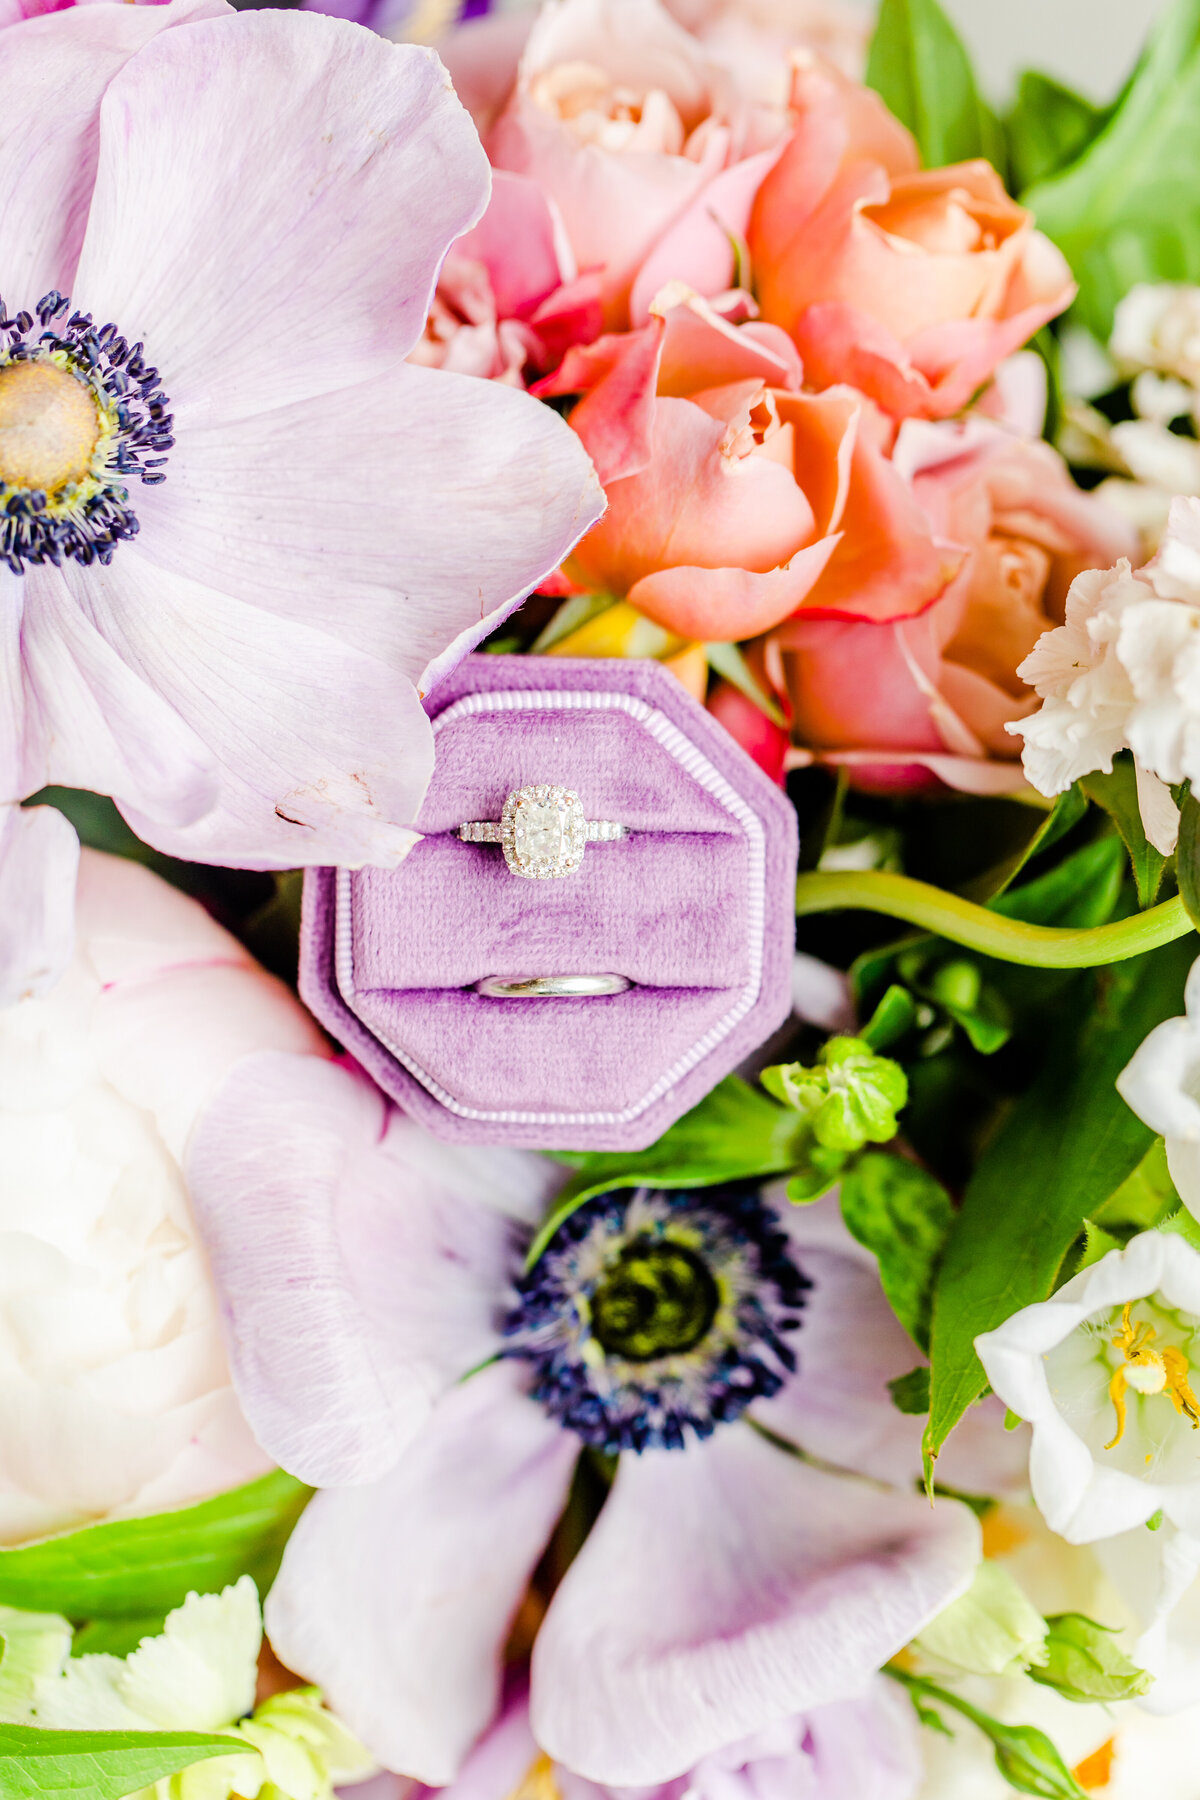 photo of wedding rings and engagement ring with purple anemones